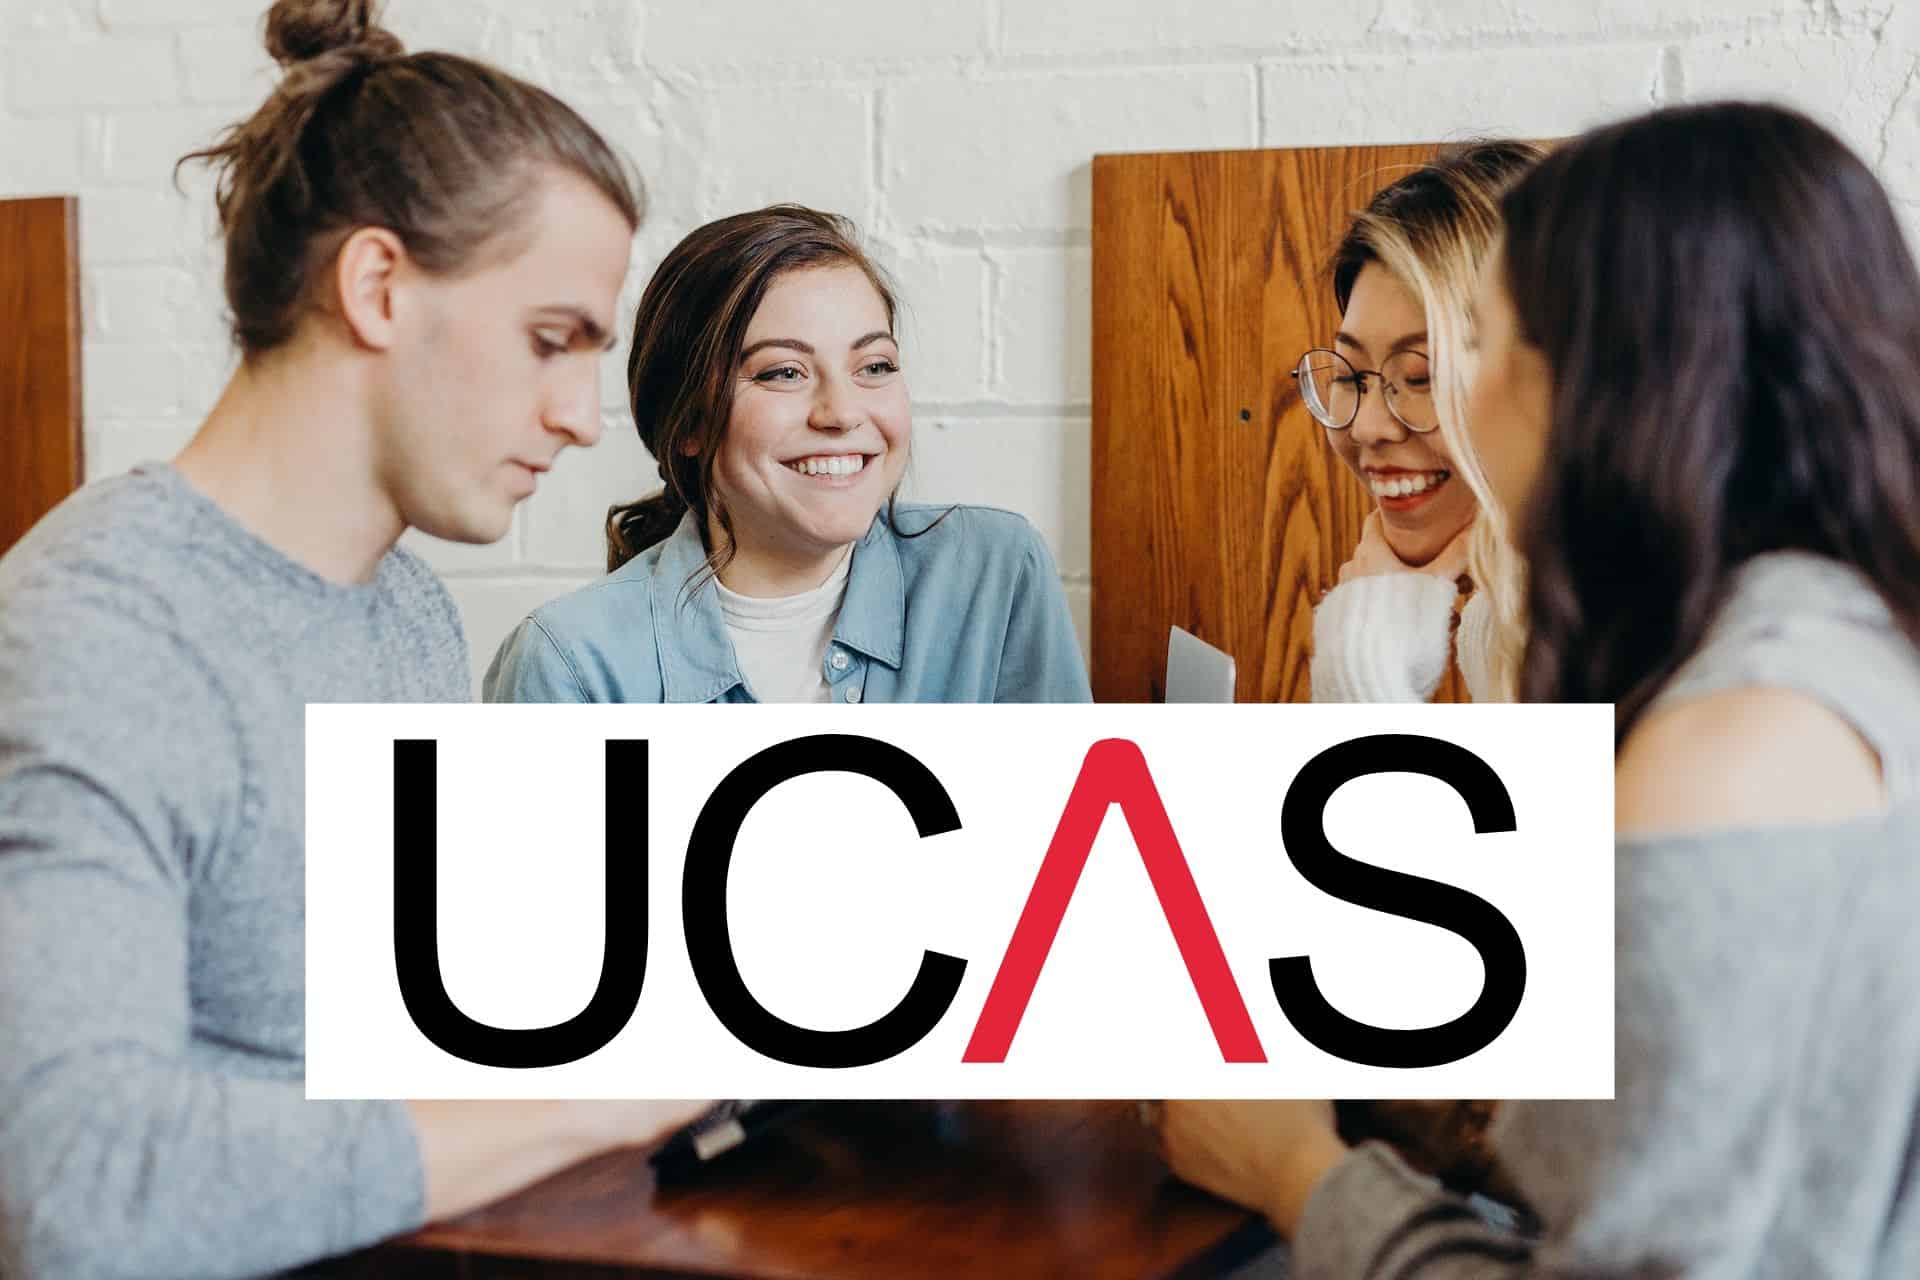 UCAS Application: Process and Deadlines Explained in Details